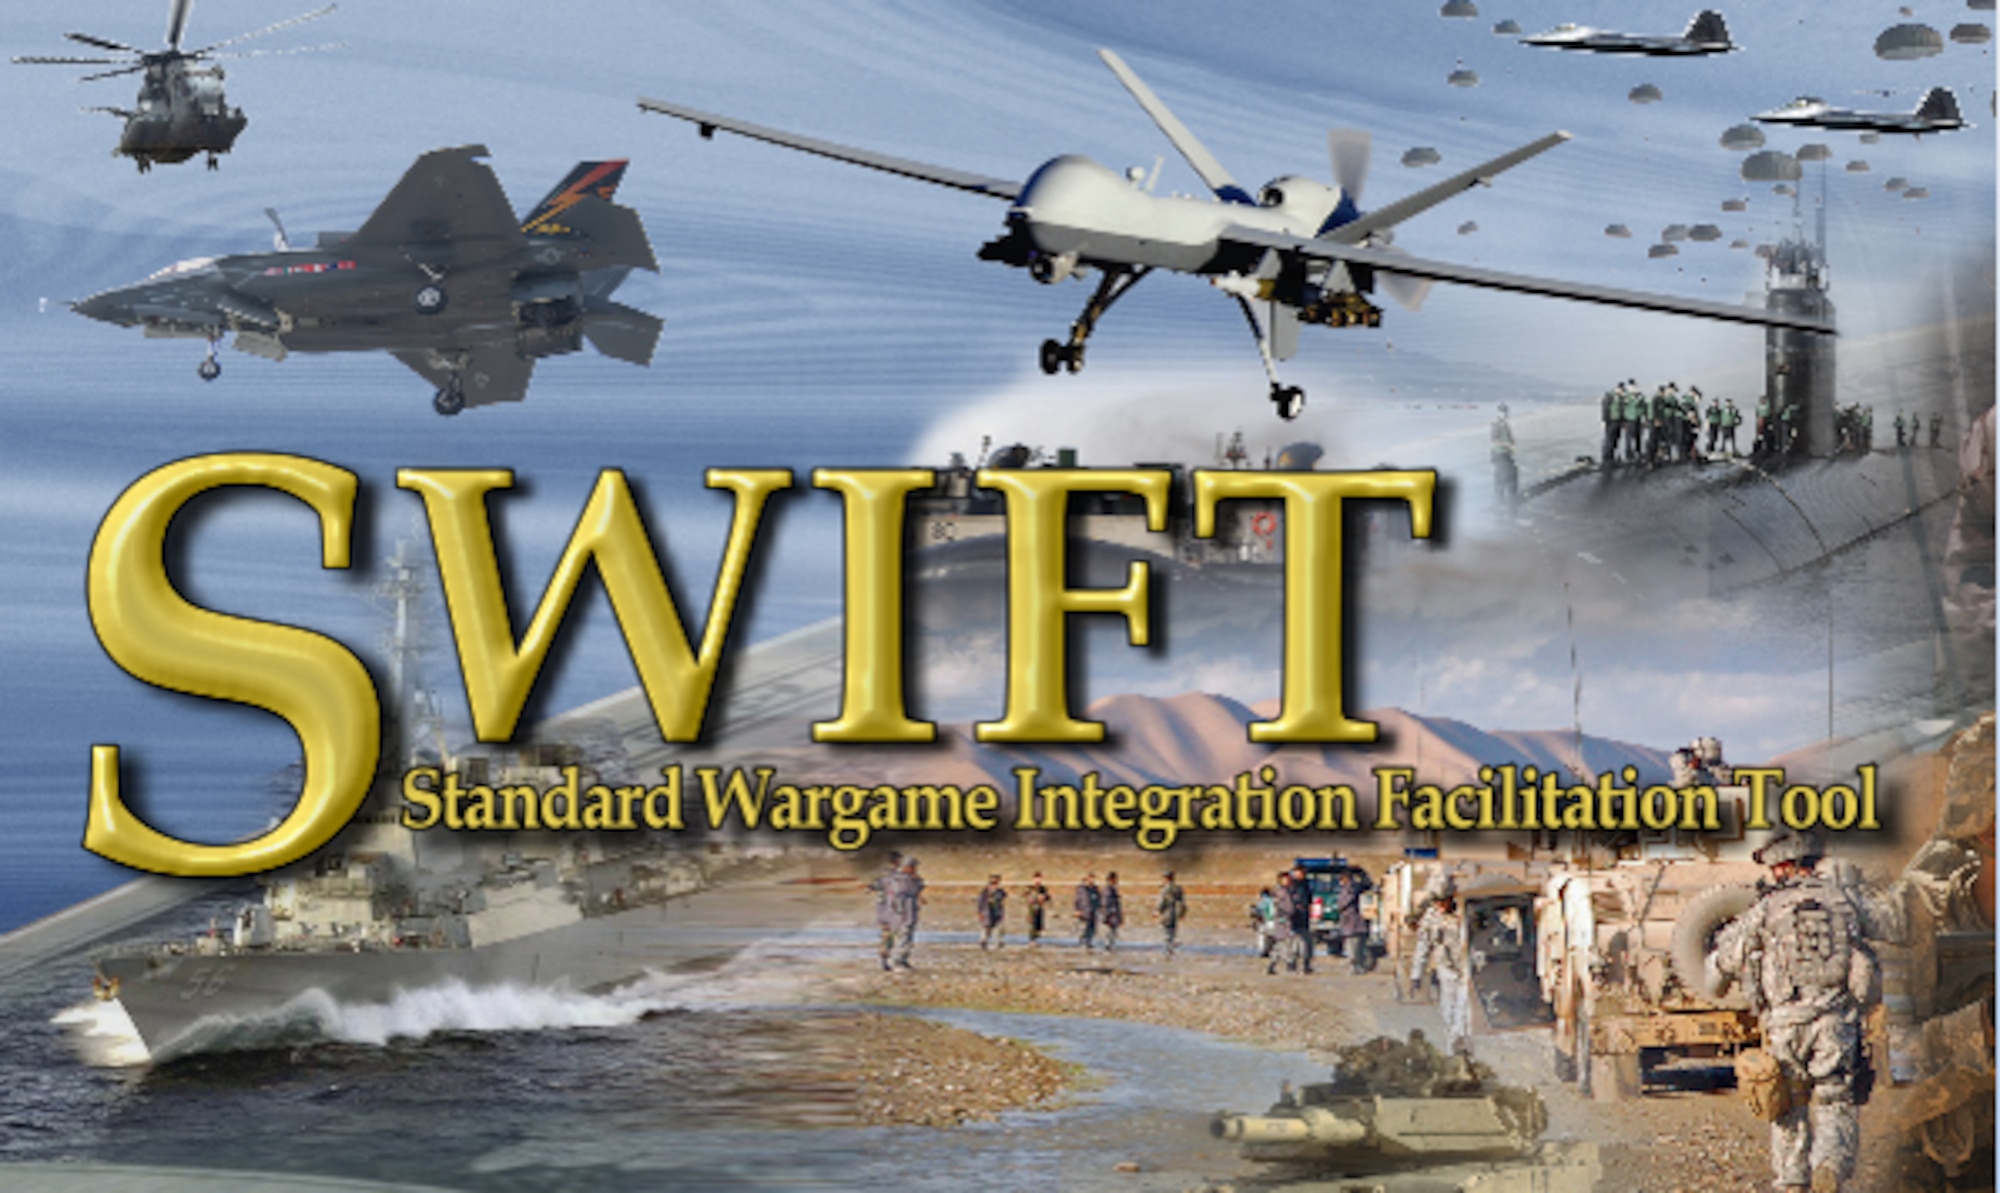 Known as JFEW-Standard Wargame Integration Facilitation Toolkit (SWIFT), the tool provided a digital interface to play, present, and analyze the wargame, and allowed players to quickly react to the operational impact of fuel logistics in real-time.